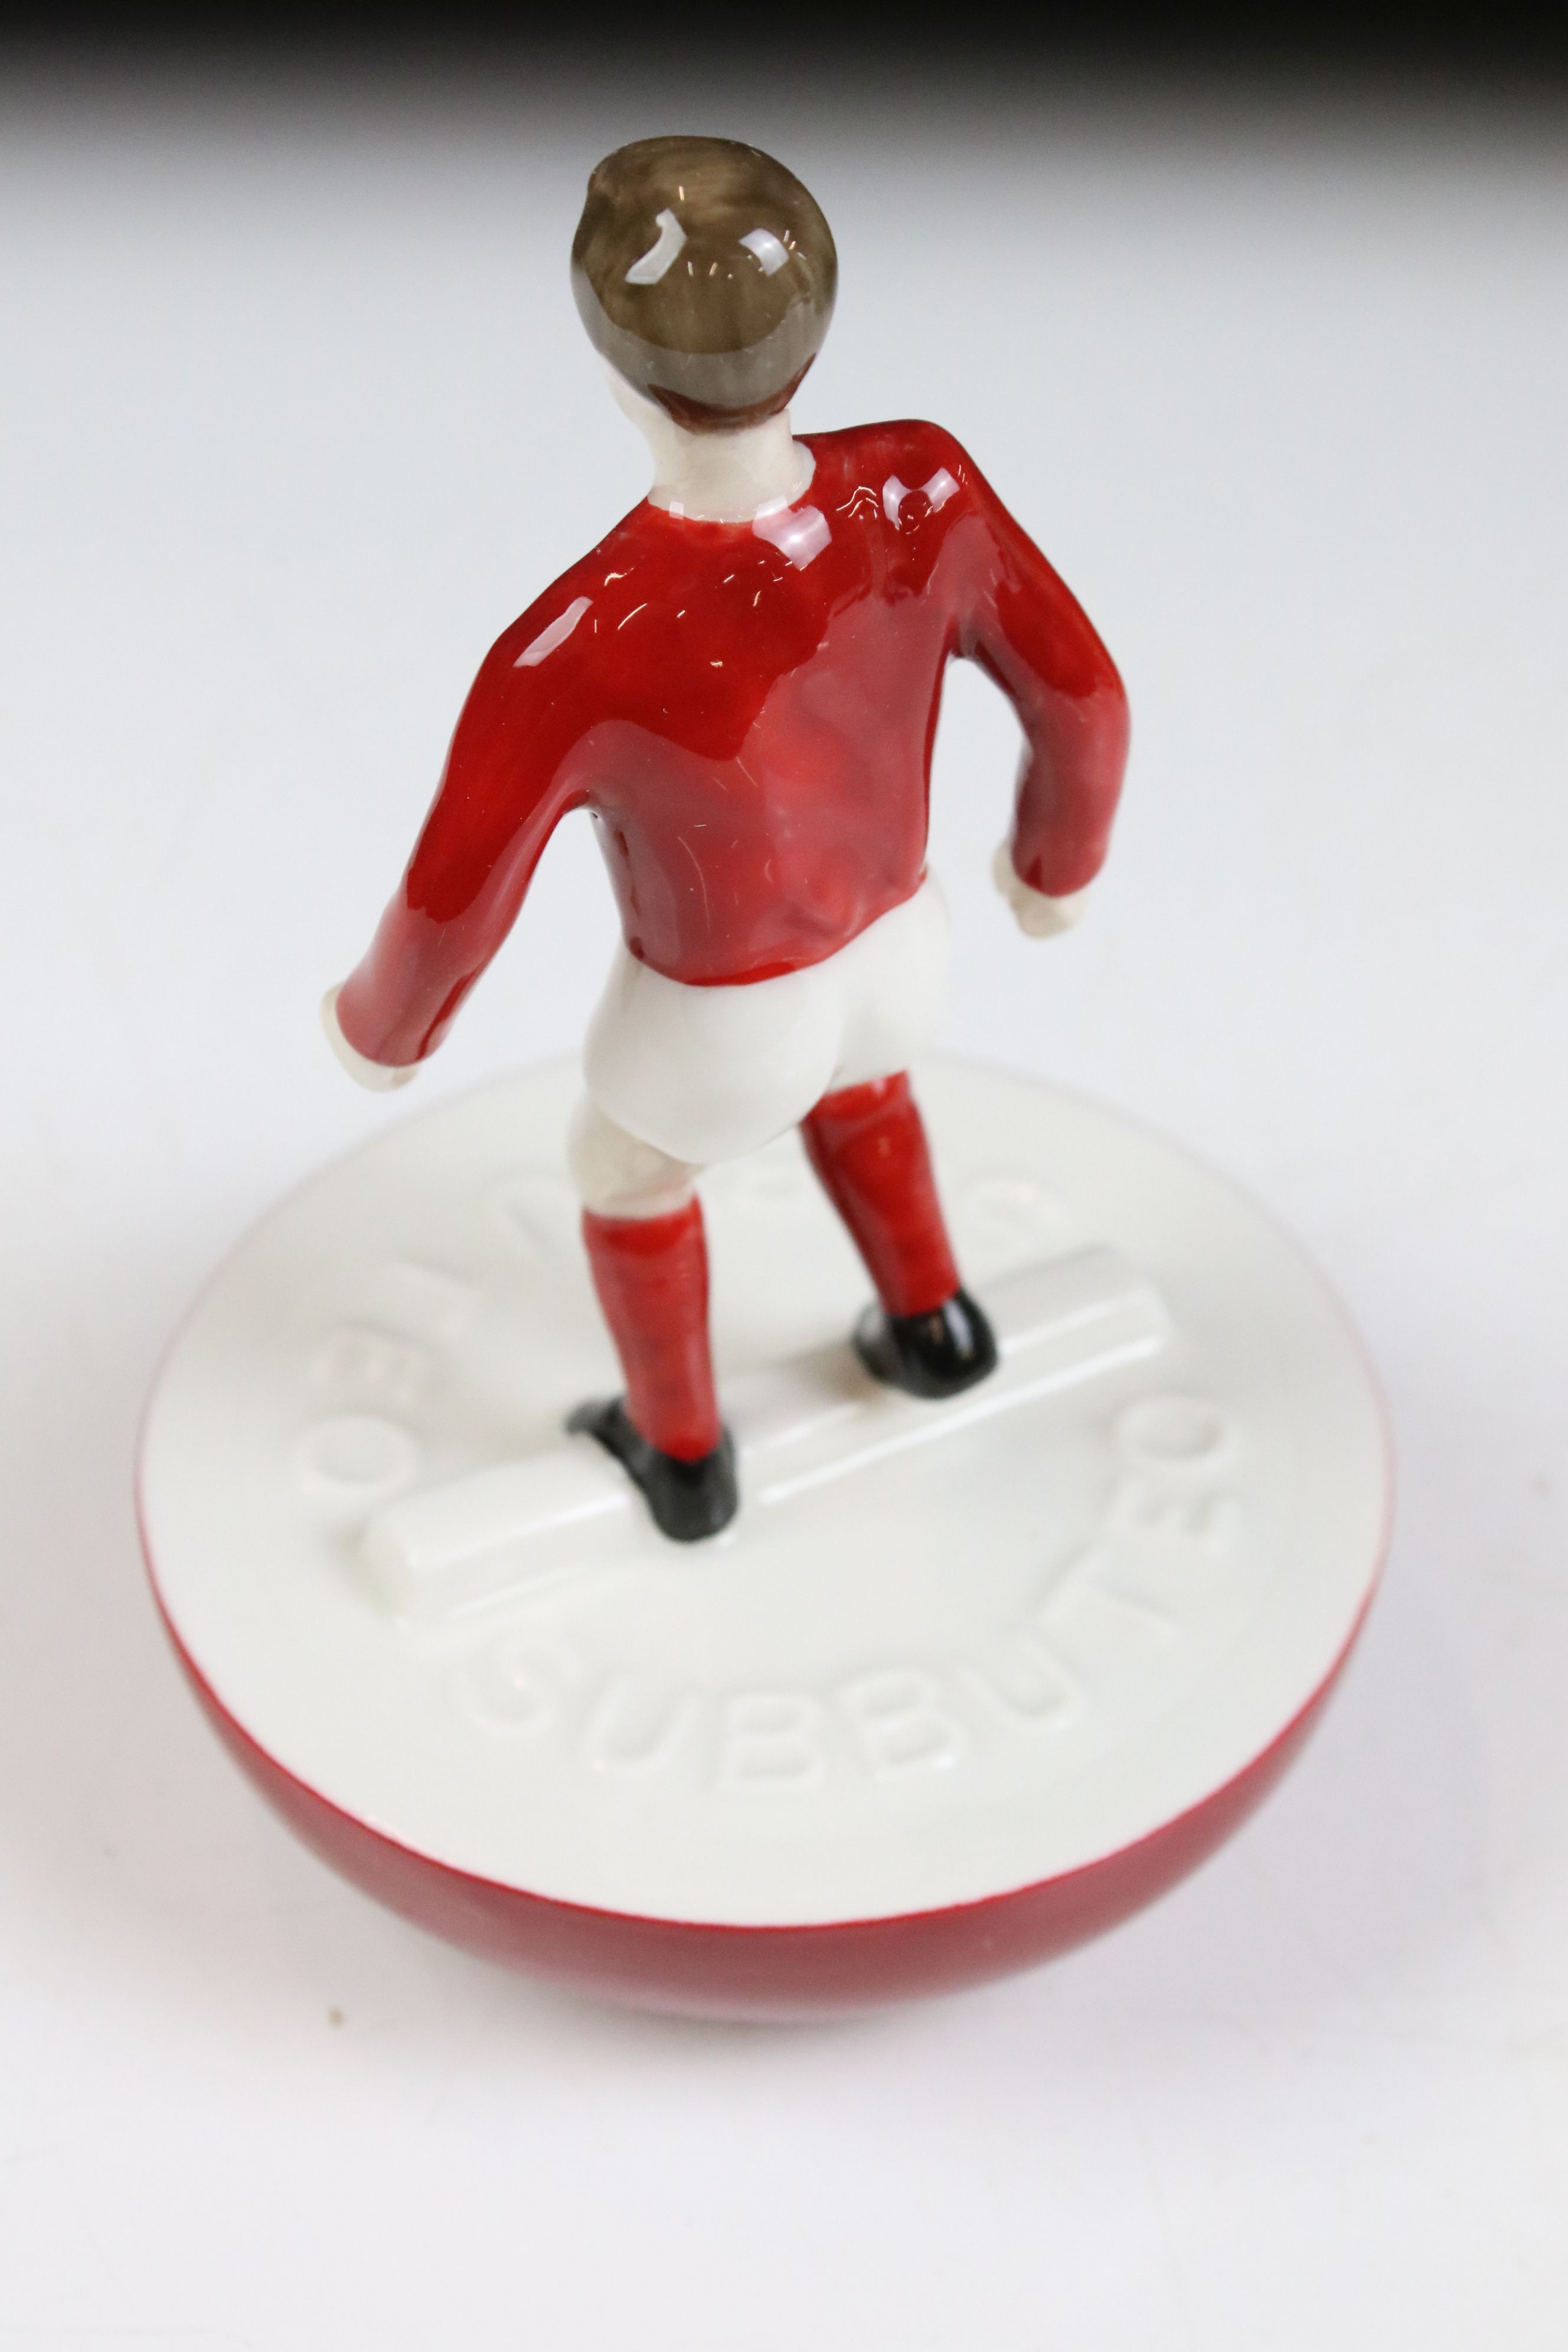 Two Royal Doulton Limited Edition Ceramic Subbuteo Players, MCL 12, one in red shirt and white - Image 3 of 10